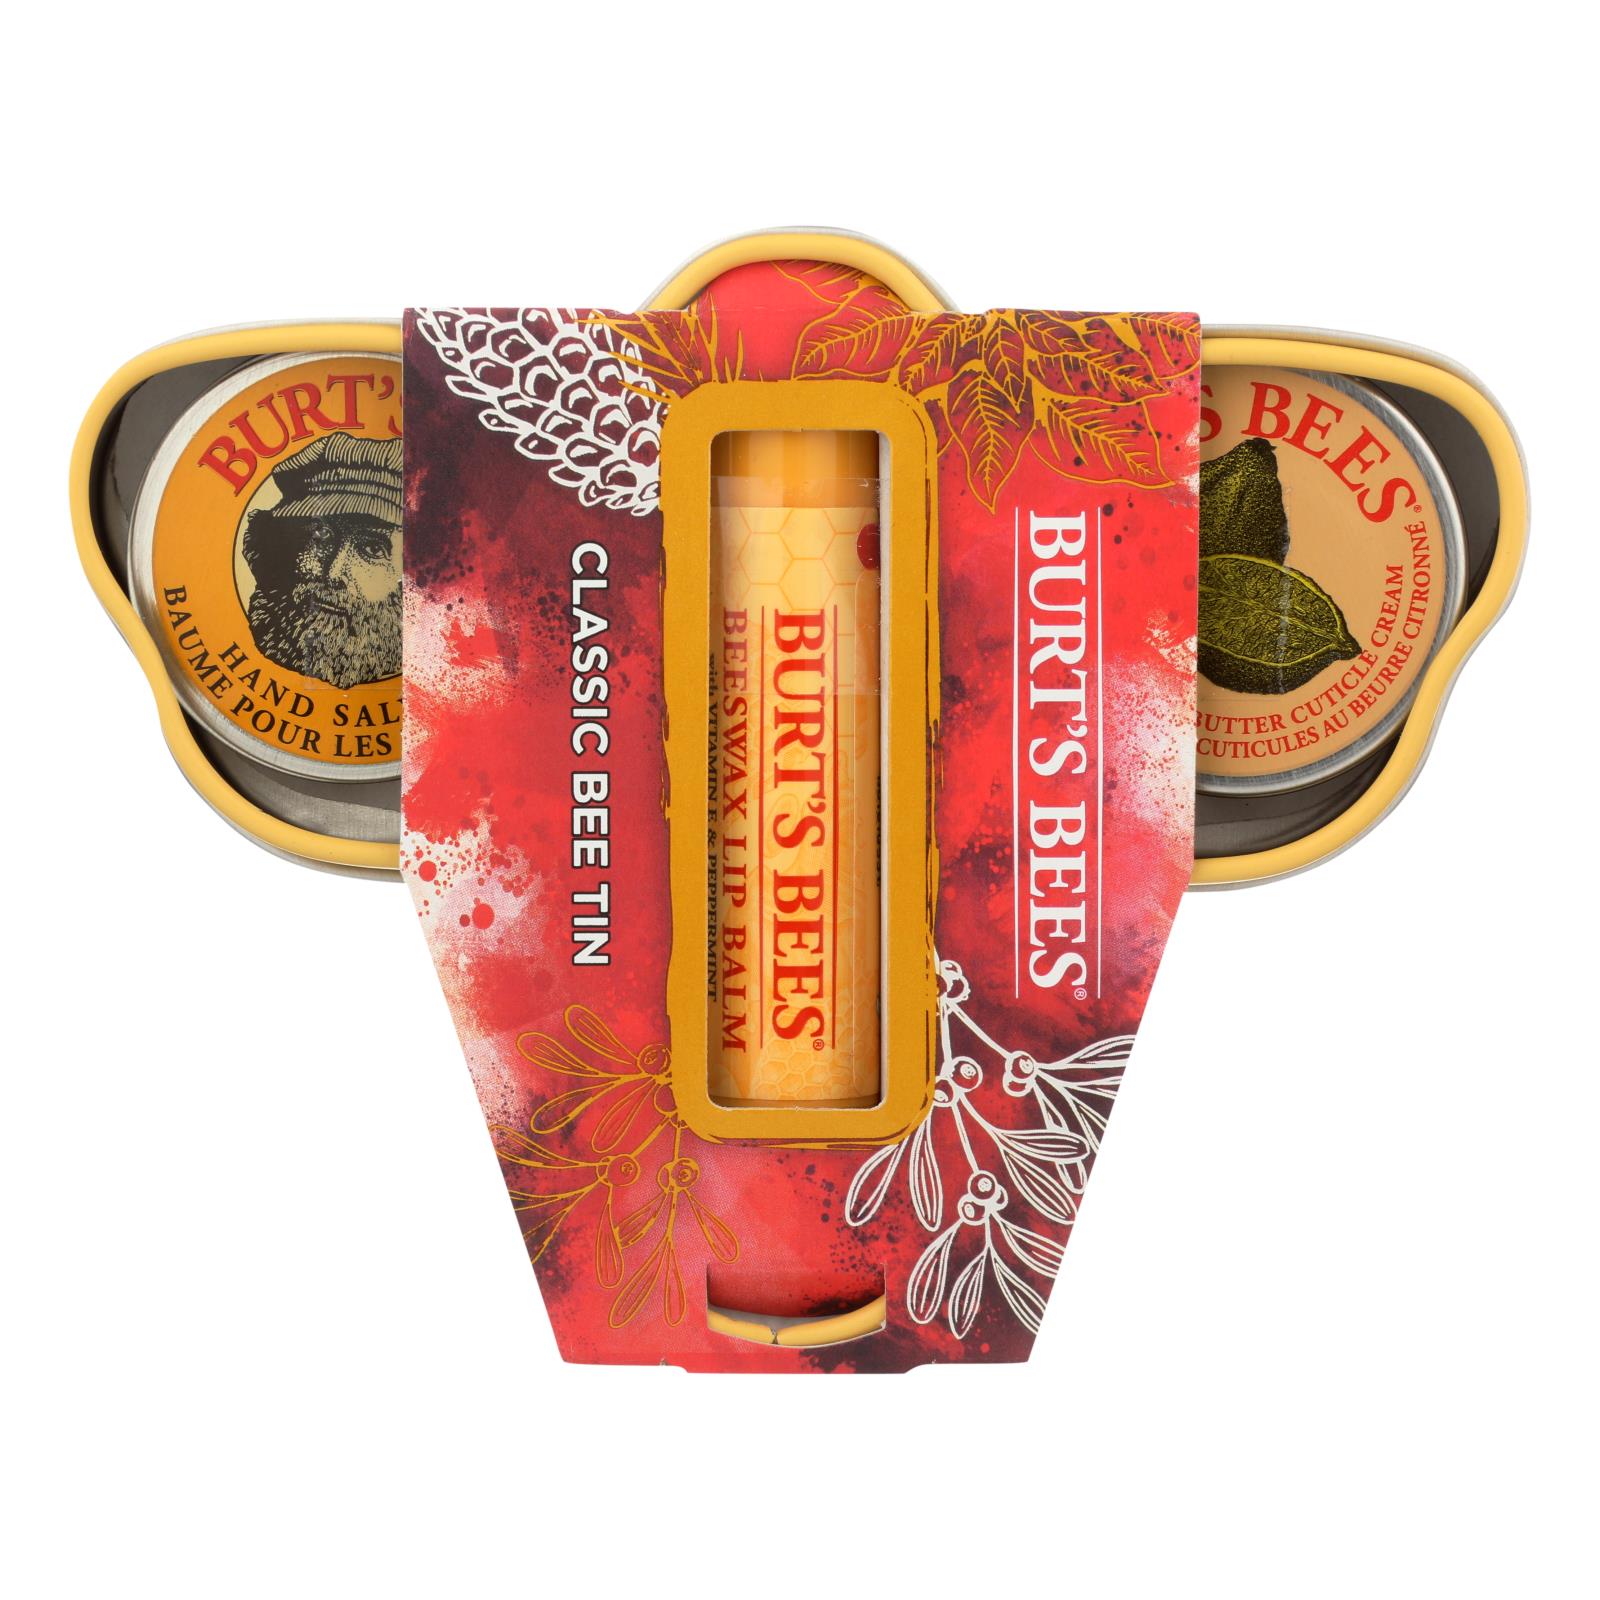 Burts Bees - Gift Pack Clssic Bee Tin - Case of 4 - 1 CT